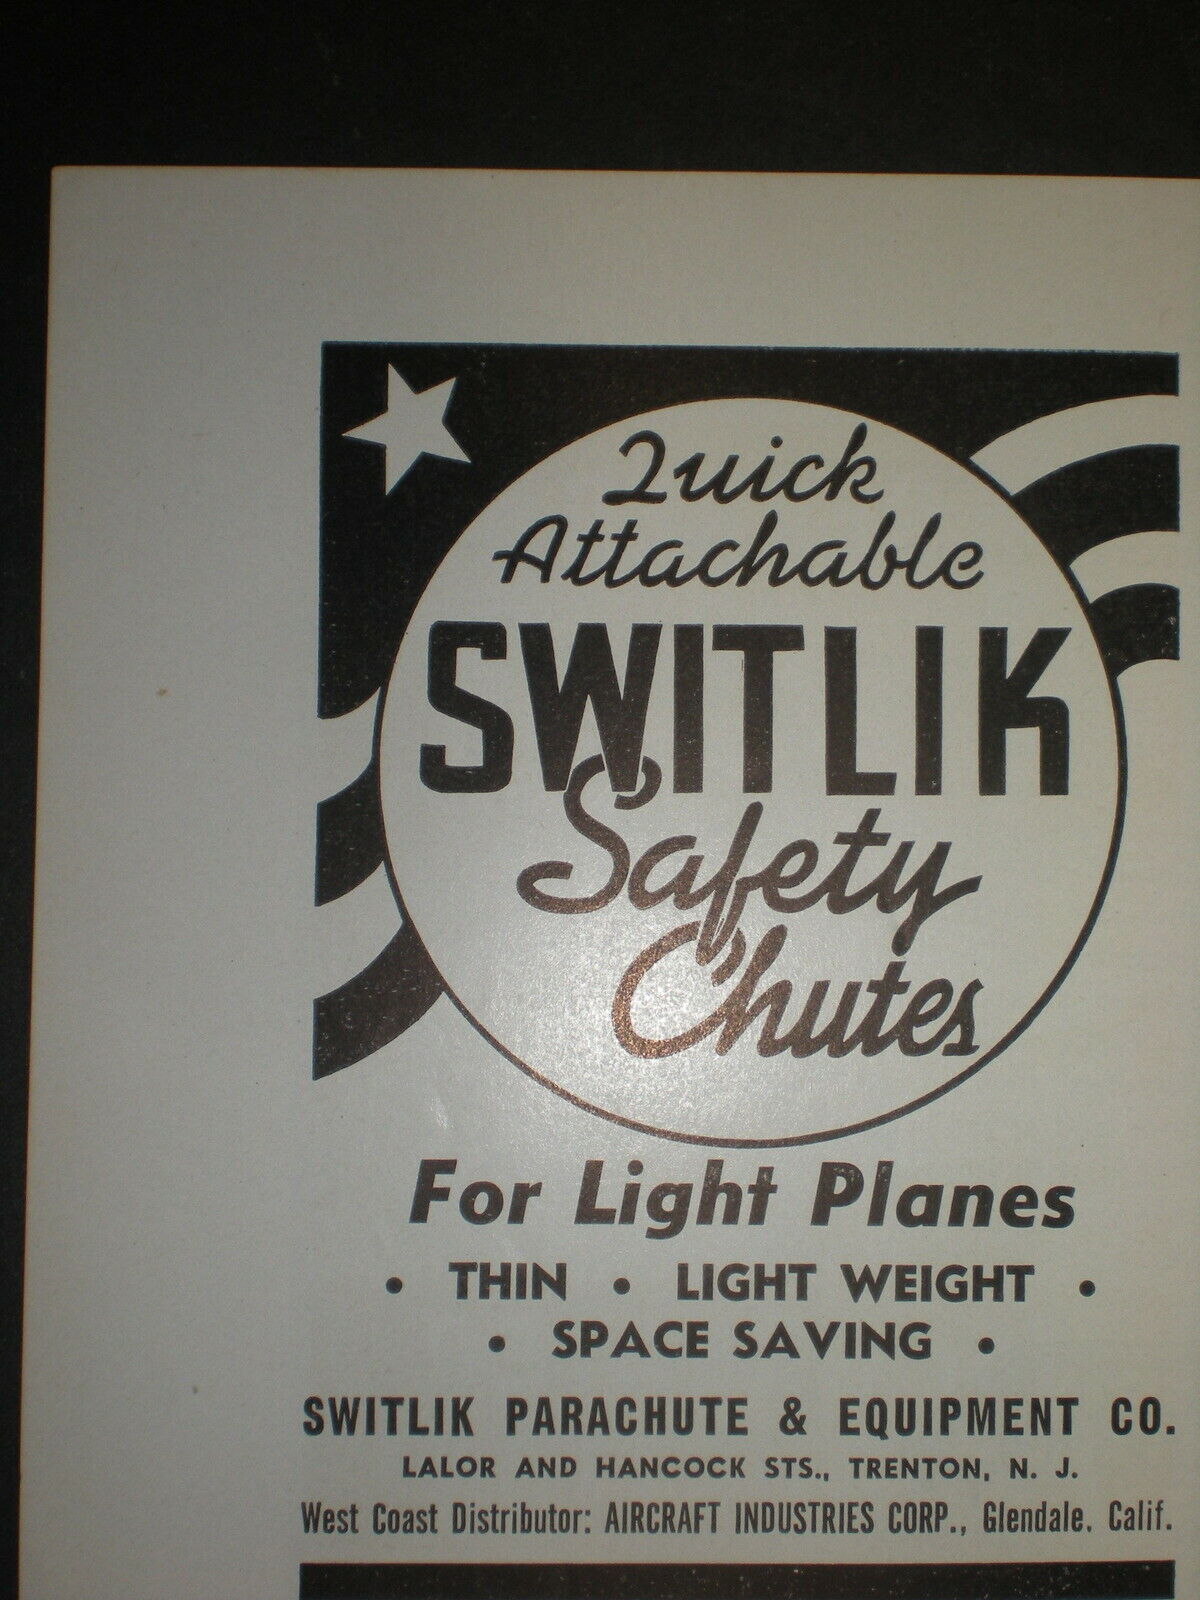 1940 QUICK ATTACHABLE SWITLIK SAFETY CHUTE PARACHUTE vintage Trade print ad